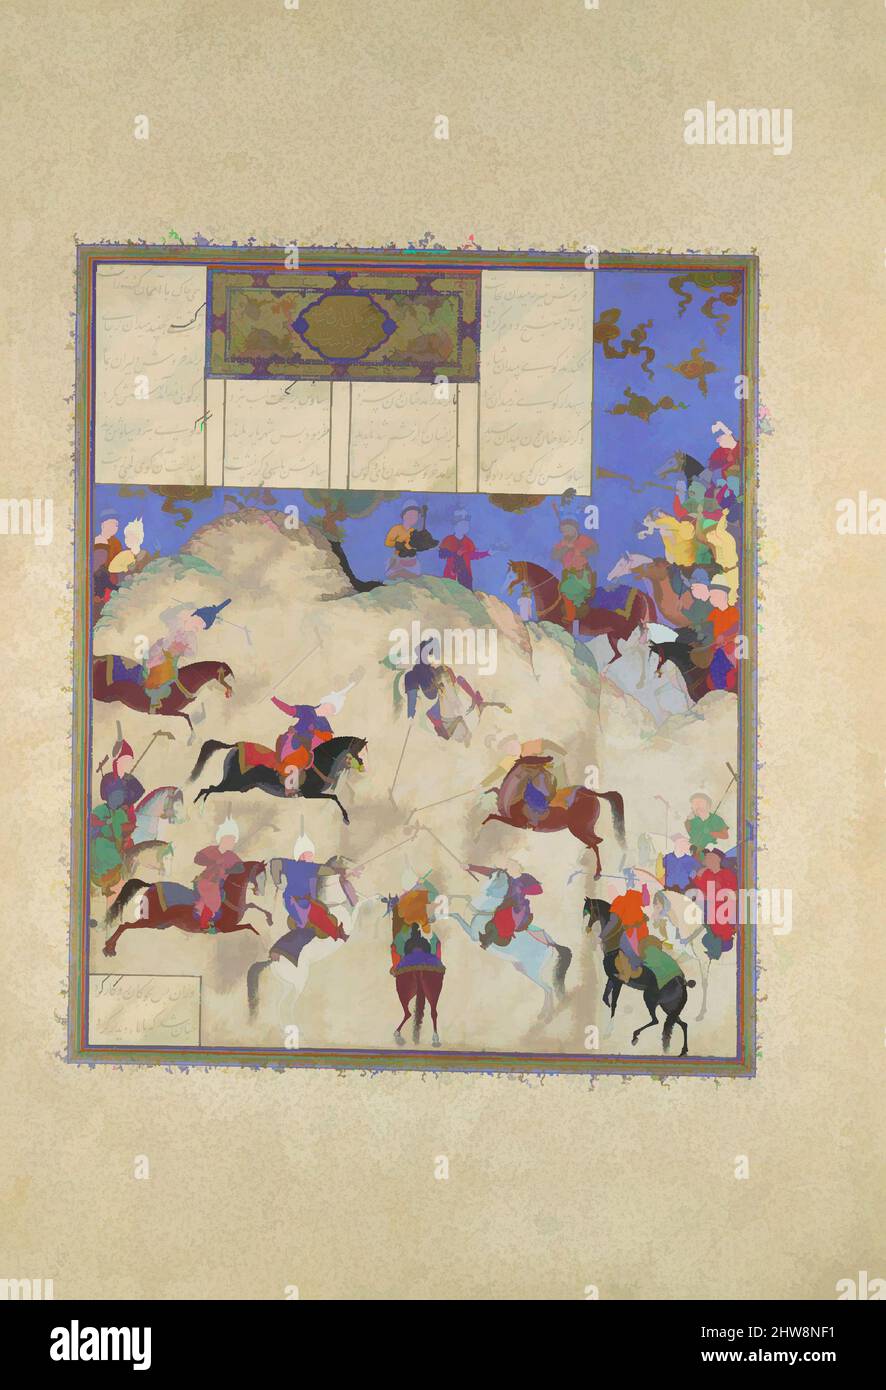 Art inspired by Siyavush Plays Polo before Afrasiyab', Folio 180v from the Shahnama (Book of Kings) of Shah Tahmasp, ca. 1525–30, Made in Iran, Tabriz, Opaque watercolor, ink, silver, and gold on paper, Painting: H. 11 3/16 in. (28.4 cm), Codices, Painting attributed to Qasim ibn 'Ali, Classic works modernized by Artotop with a splash of modernity. Shapes, color and value, eye-catching visual impact on art. Emotions through freedom of artworks in a contemporary way. A timeless message pursuing a wildly creative new direction. Artists turning to the digital medium and creating the Artotop NFT Stock Photo